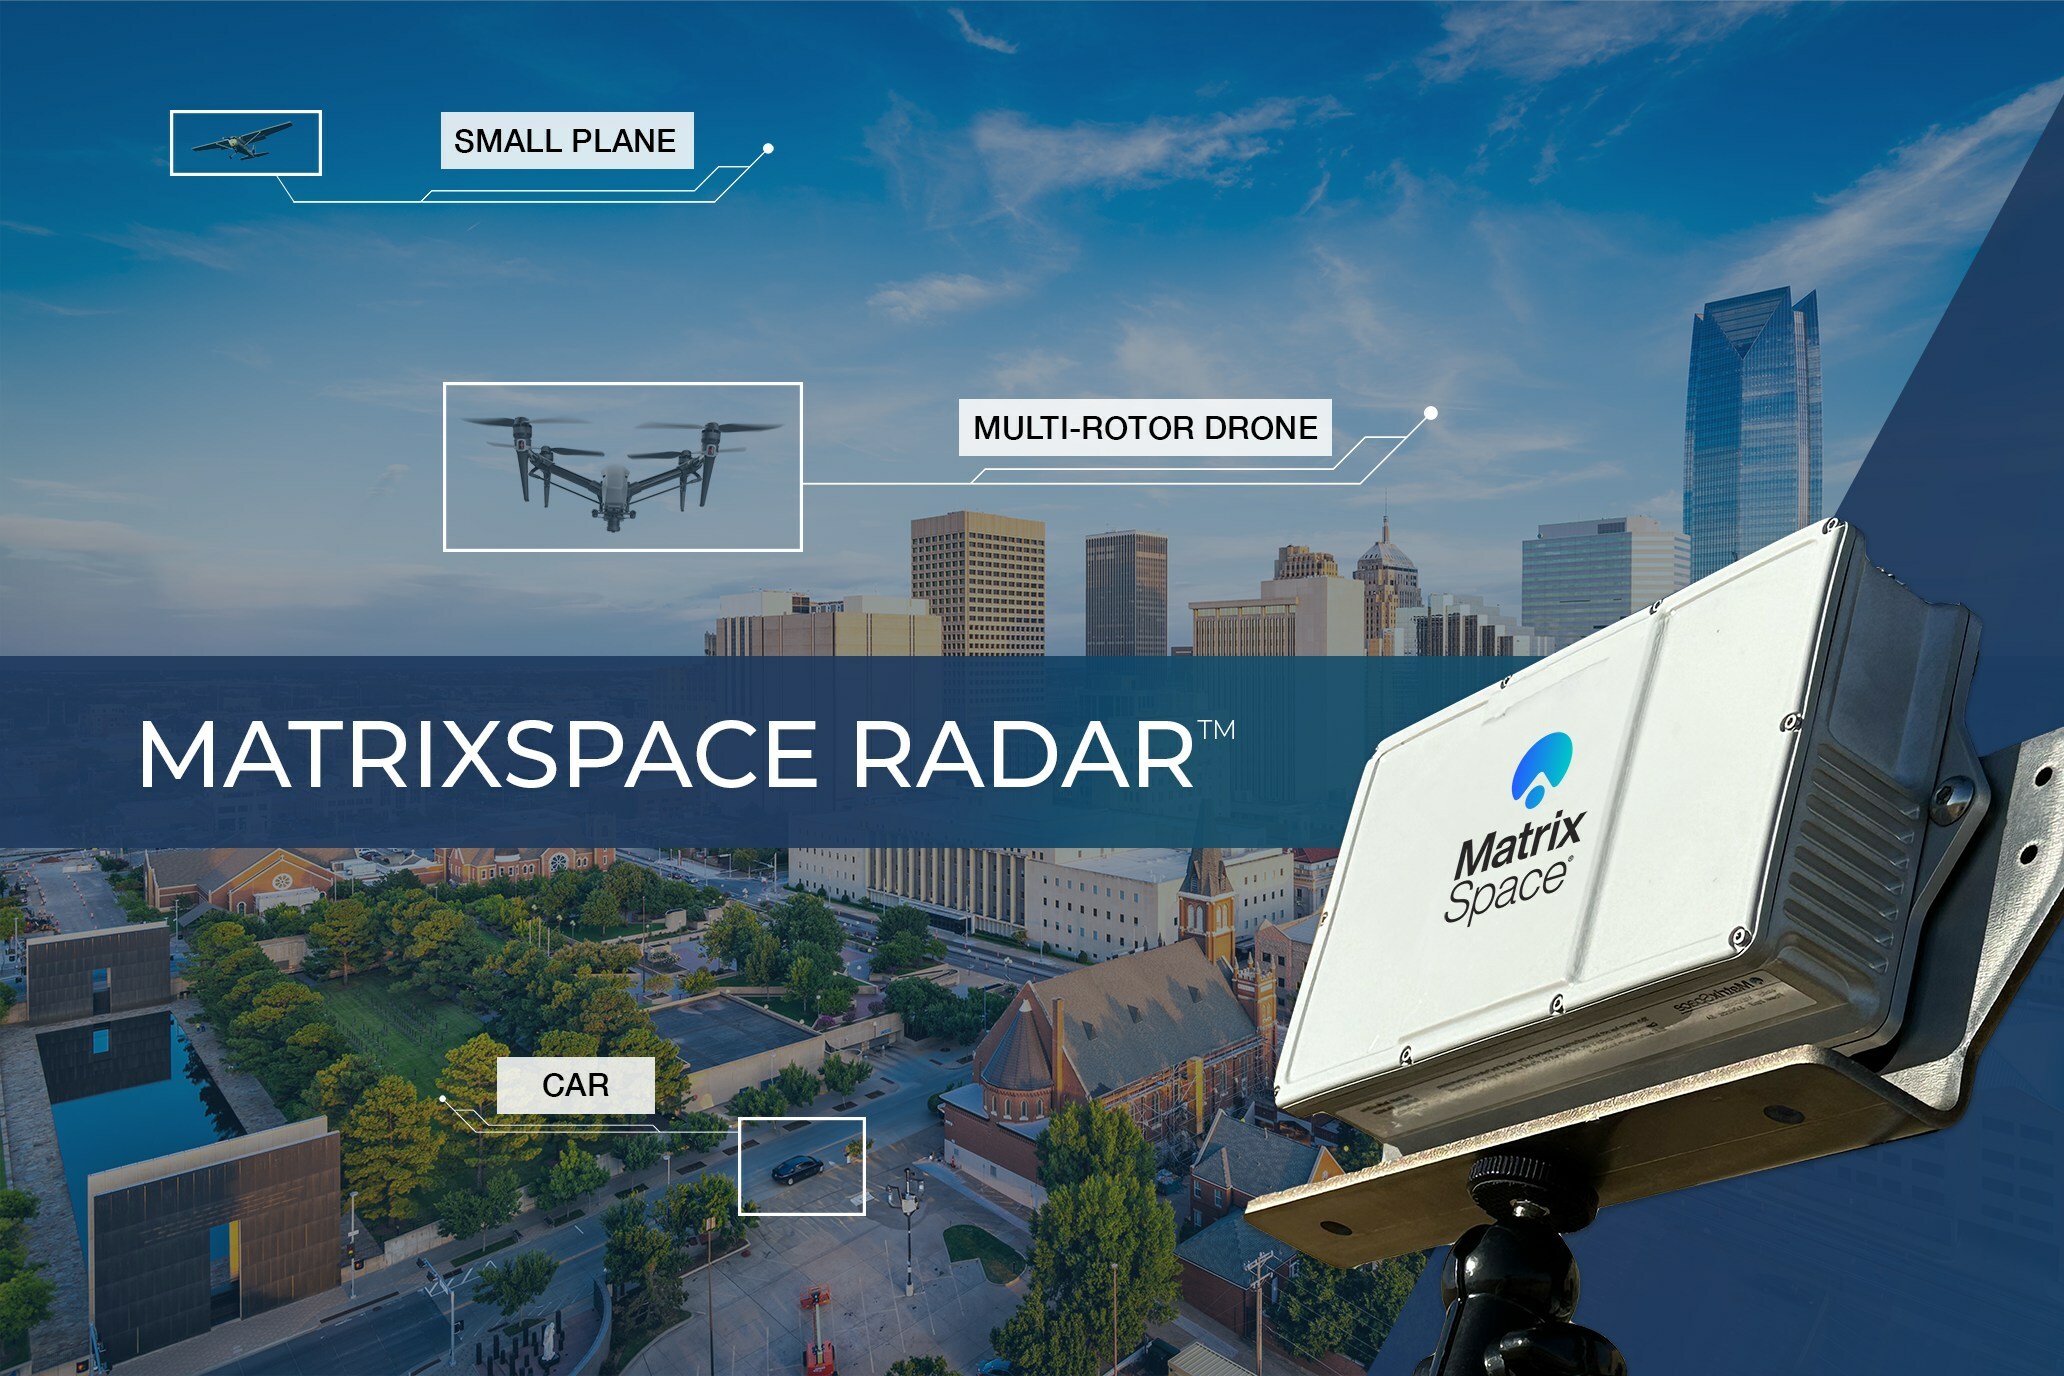 MatrixSpace Radar Ships to Support C-UAS and BVLOS Applications